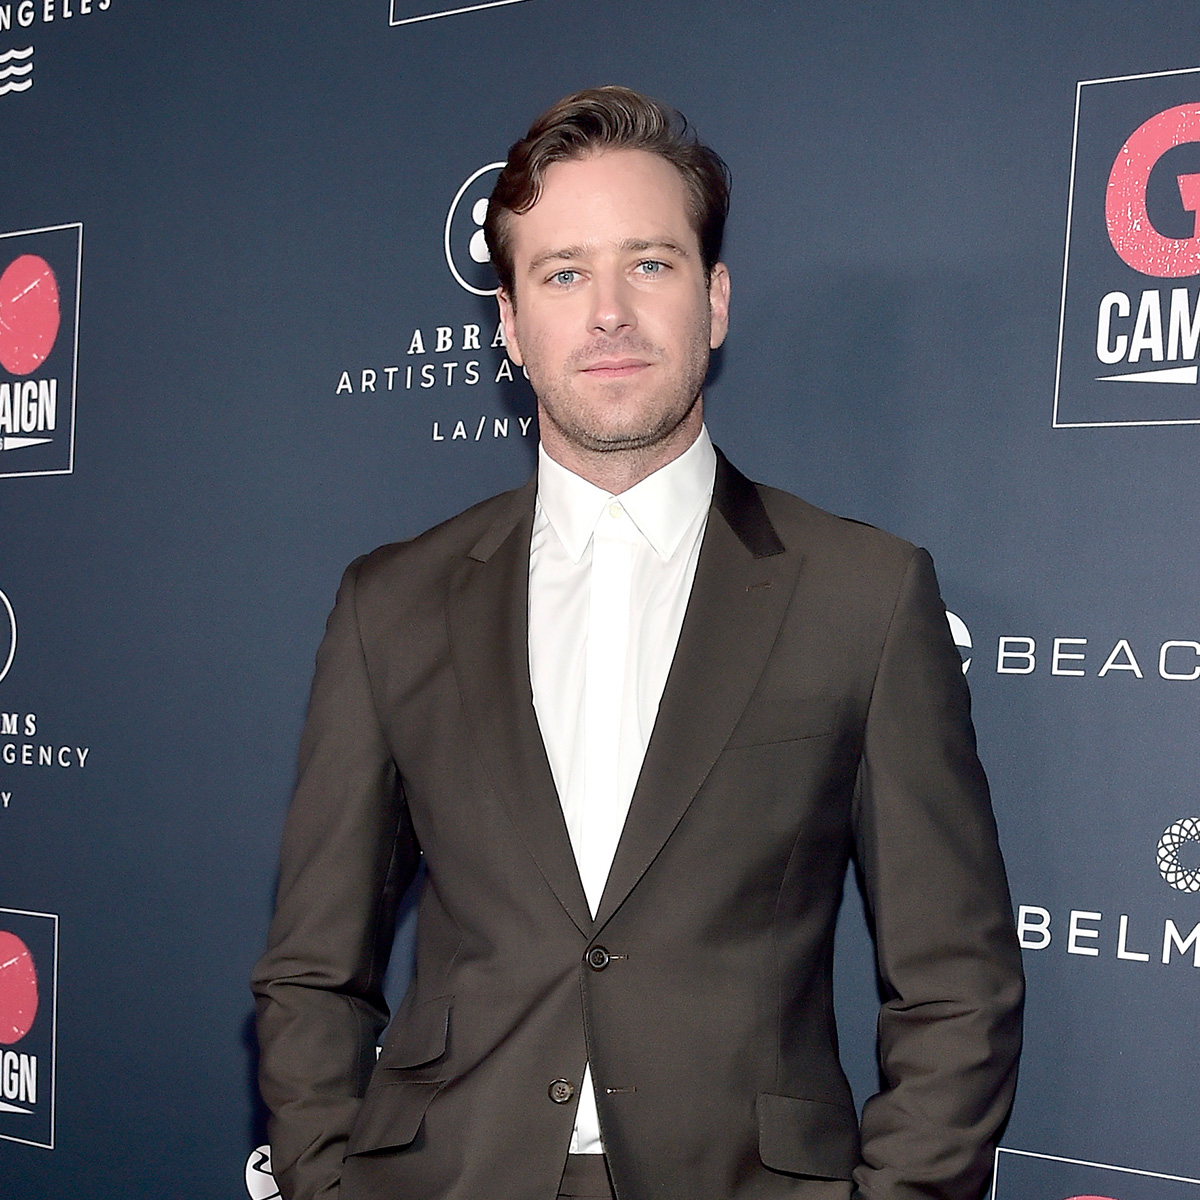 Why Armie Hammer Sold Timeshares in Cayman Islands Amid Allegations